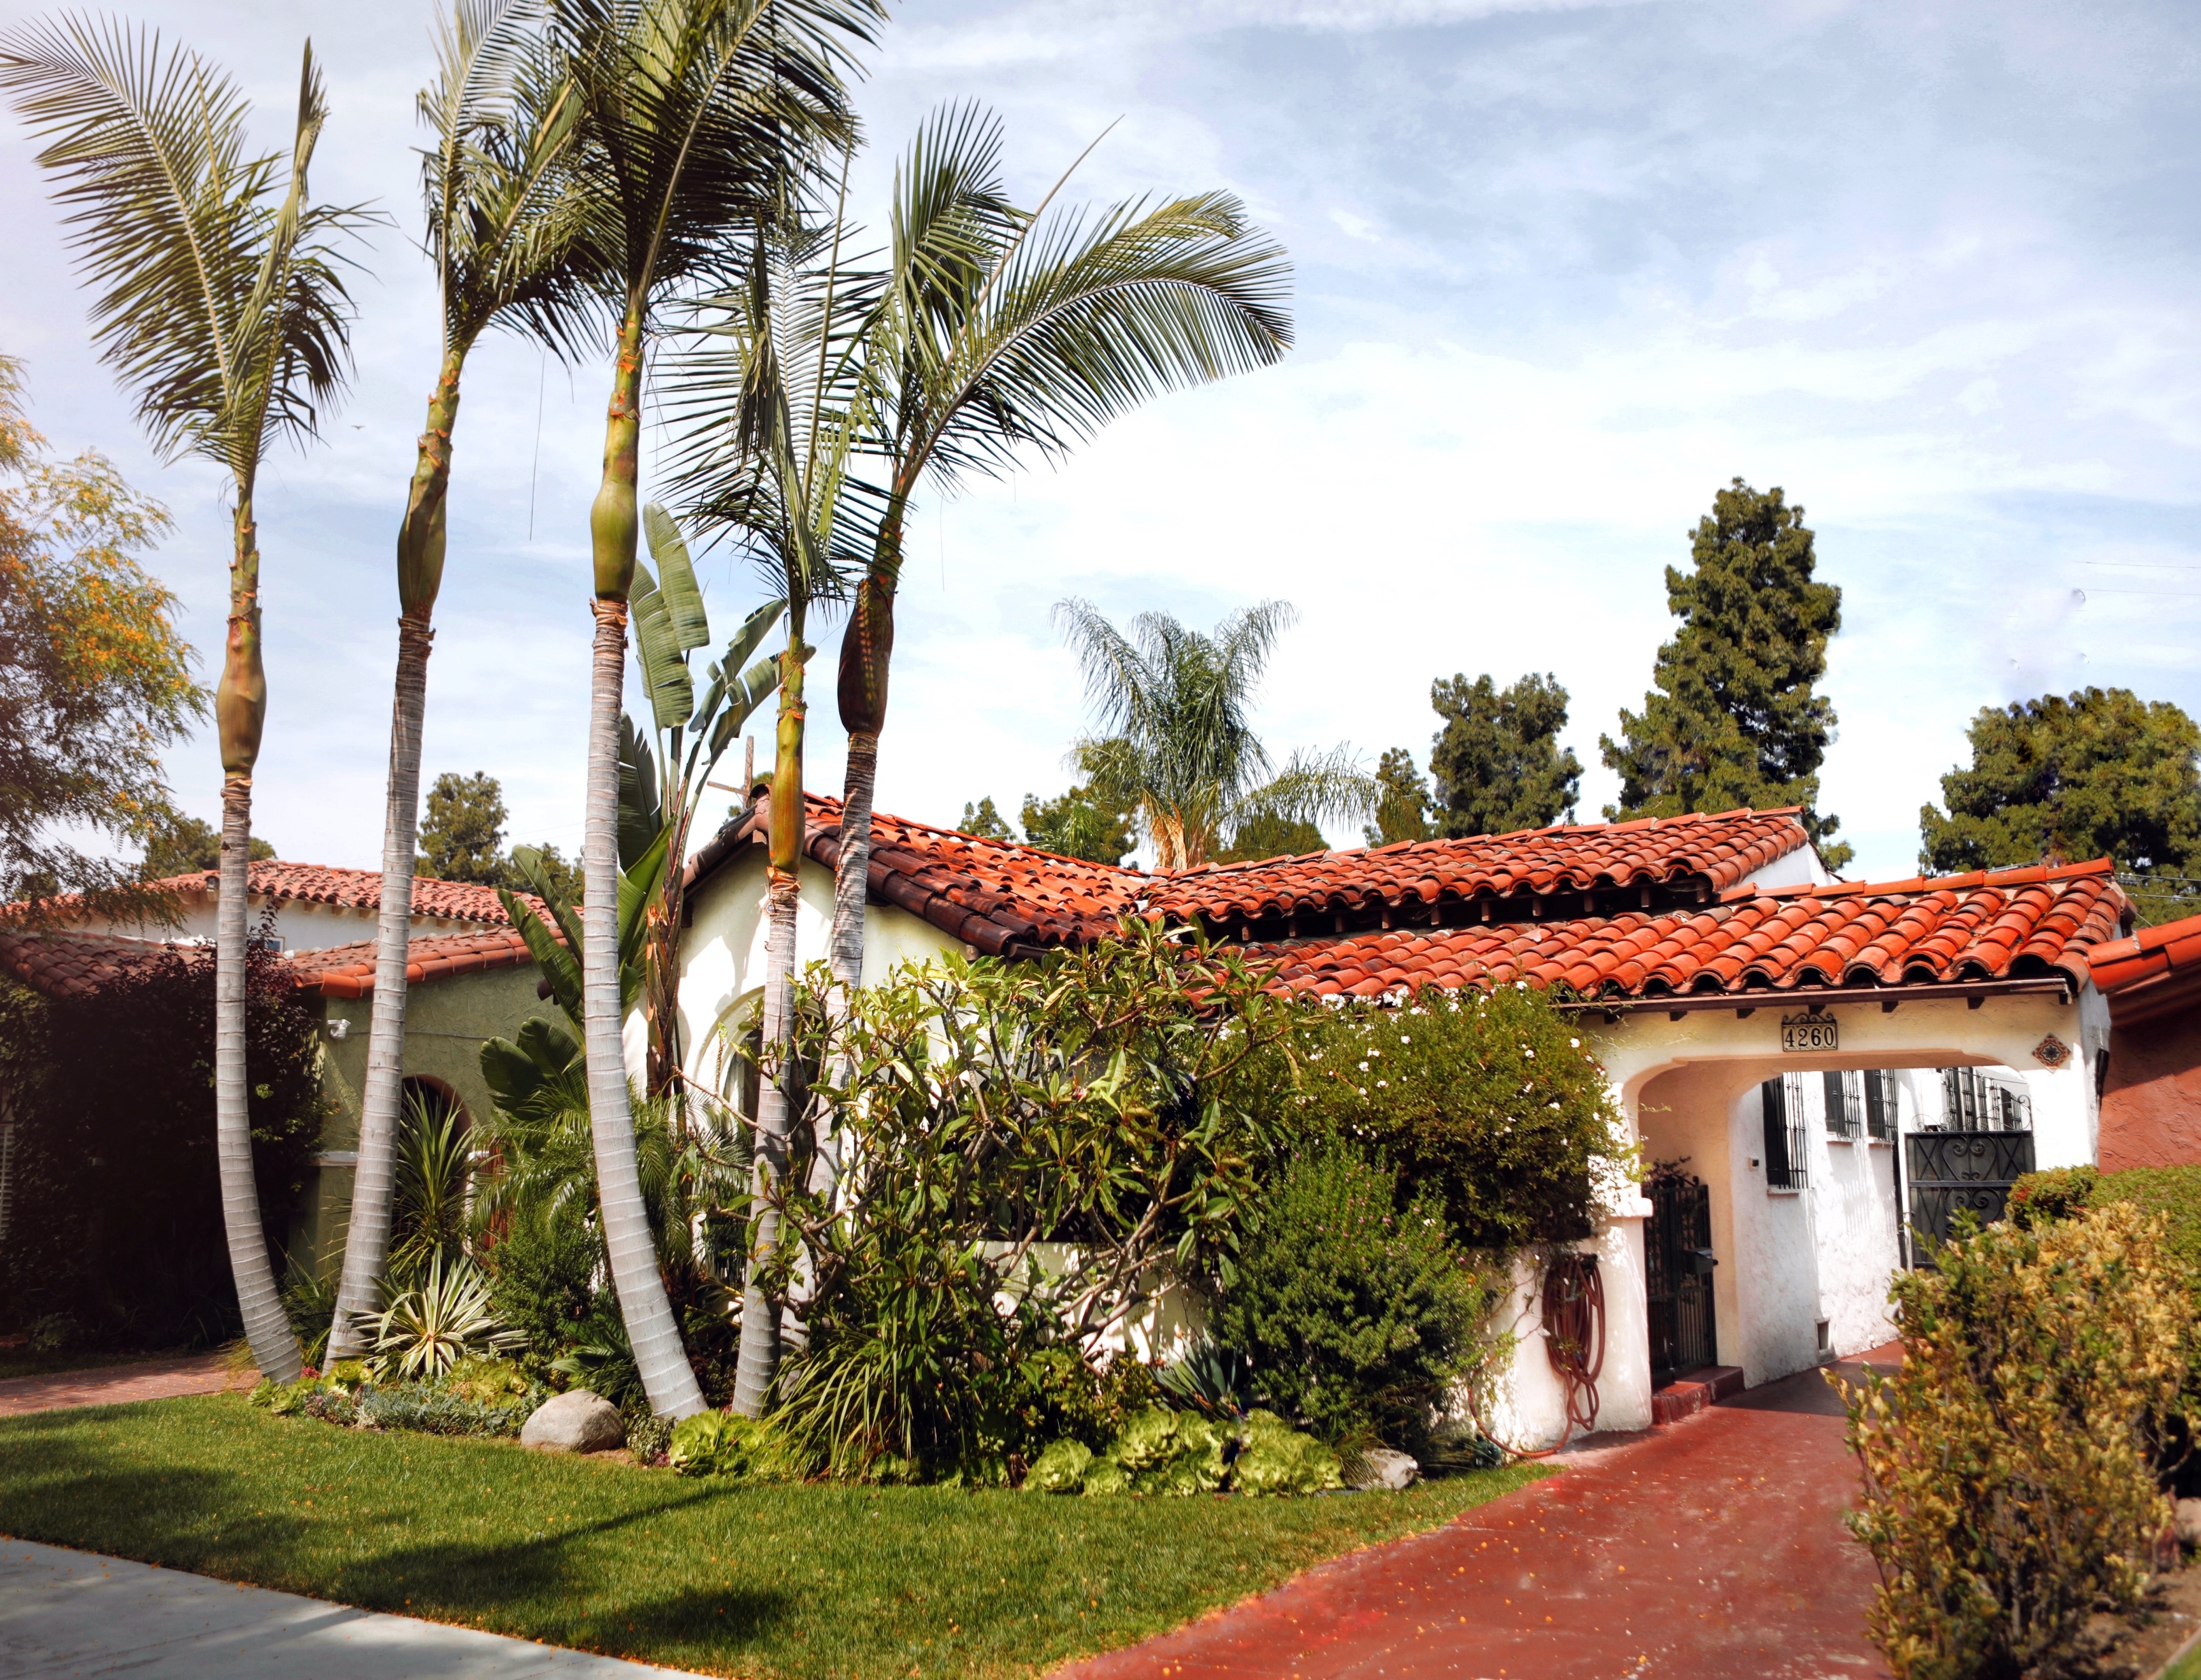 Tile-roofed home surrounded by palm trees.